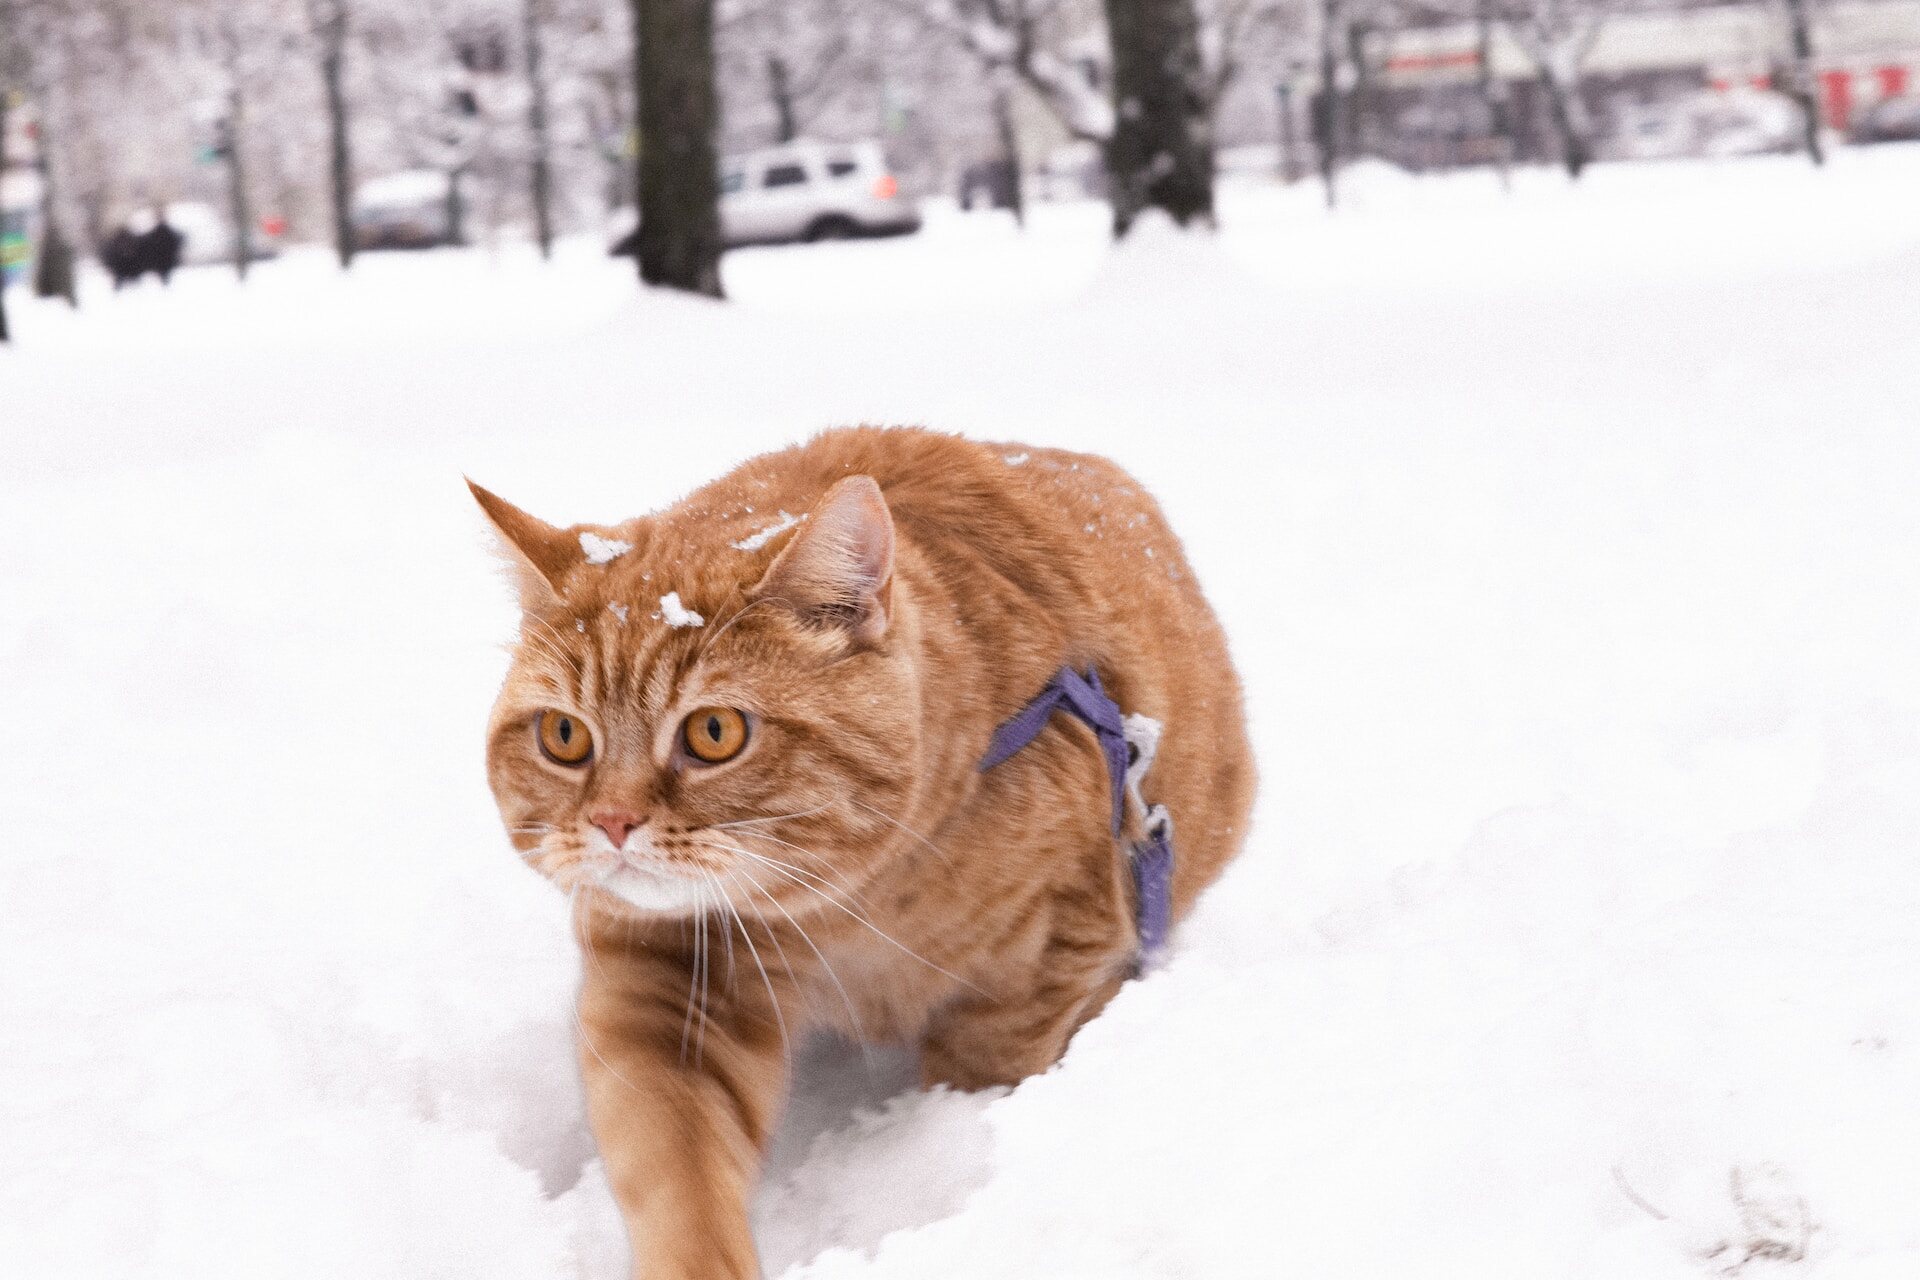 A cat wearing a harness hunting in the snow